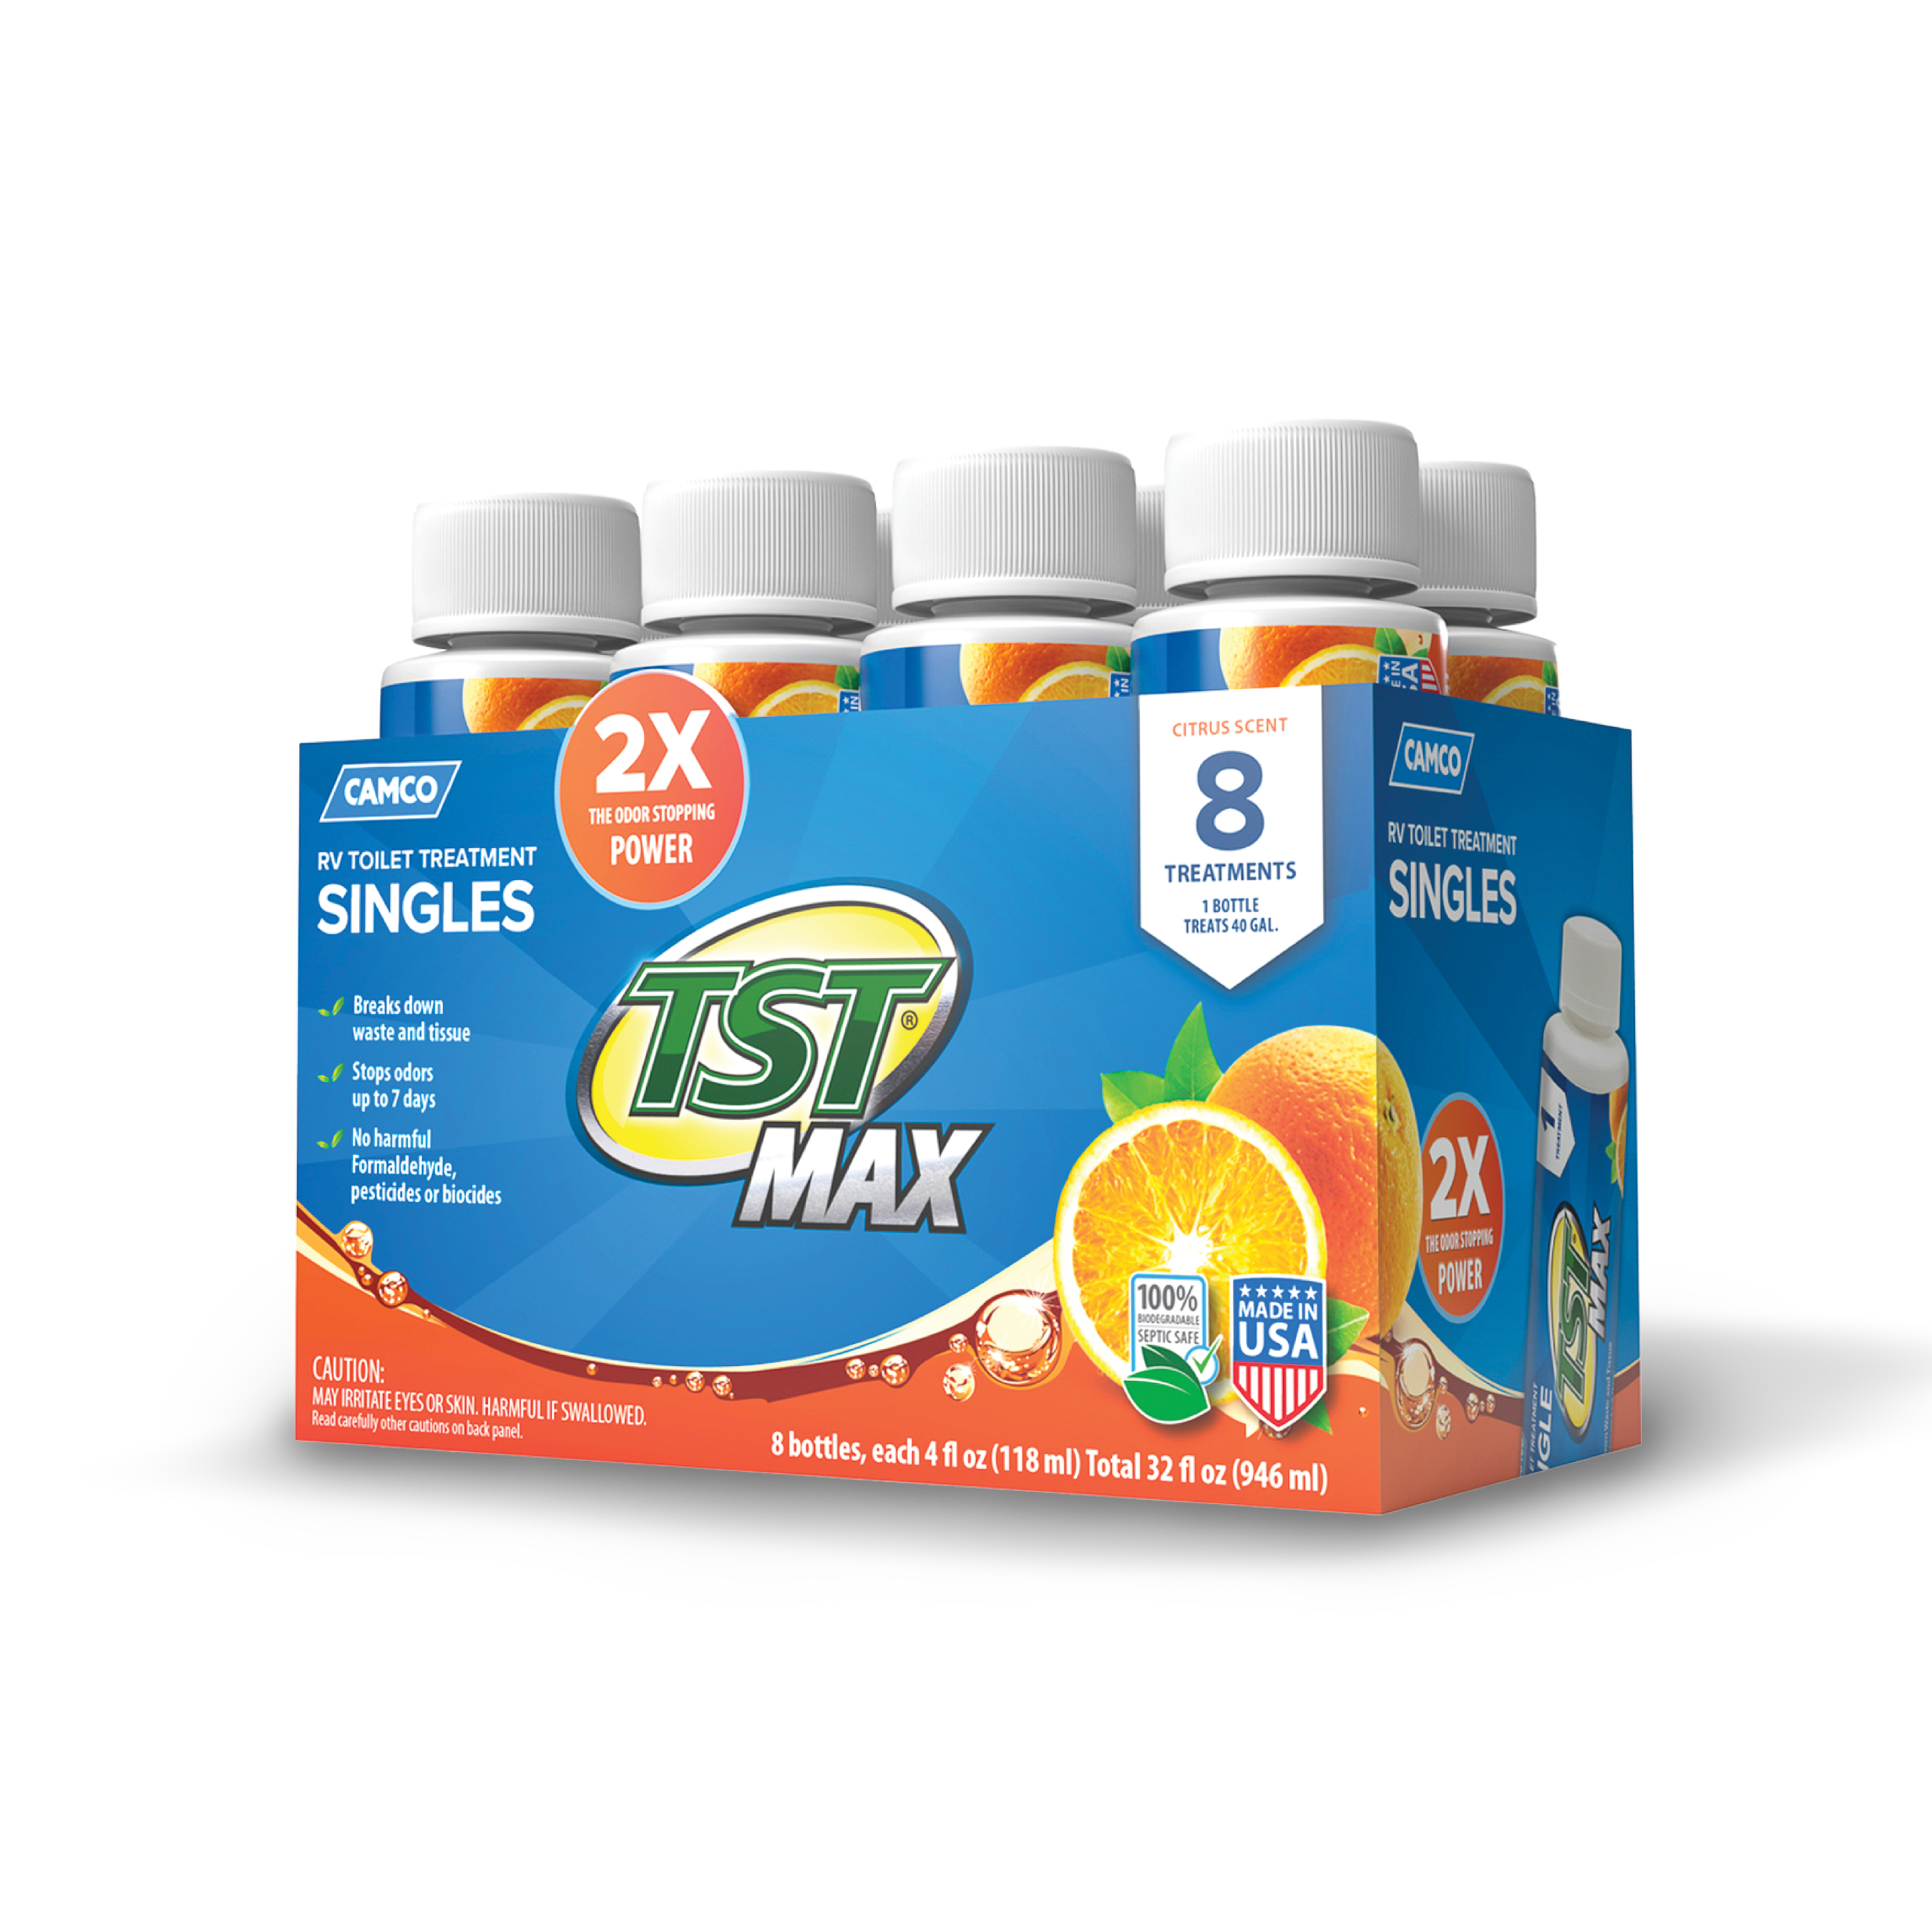 Camco TST MAX RV Toilet Treatment Singles - Septic Safe - Orange, 8 Count of 4-Ounce Bottles (41191) - image 1 of 6